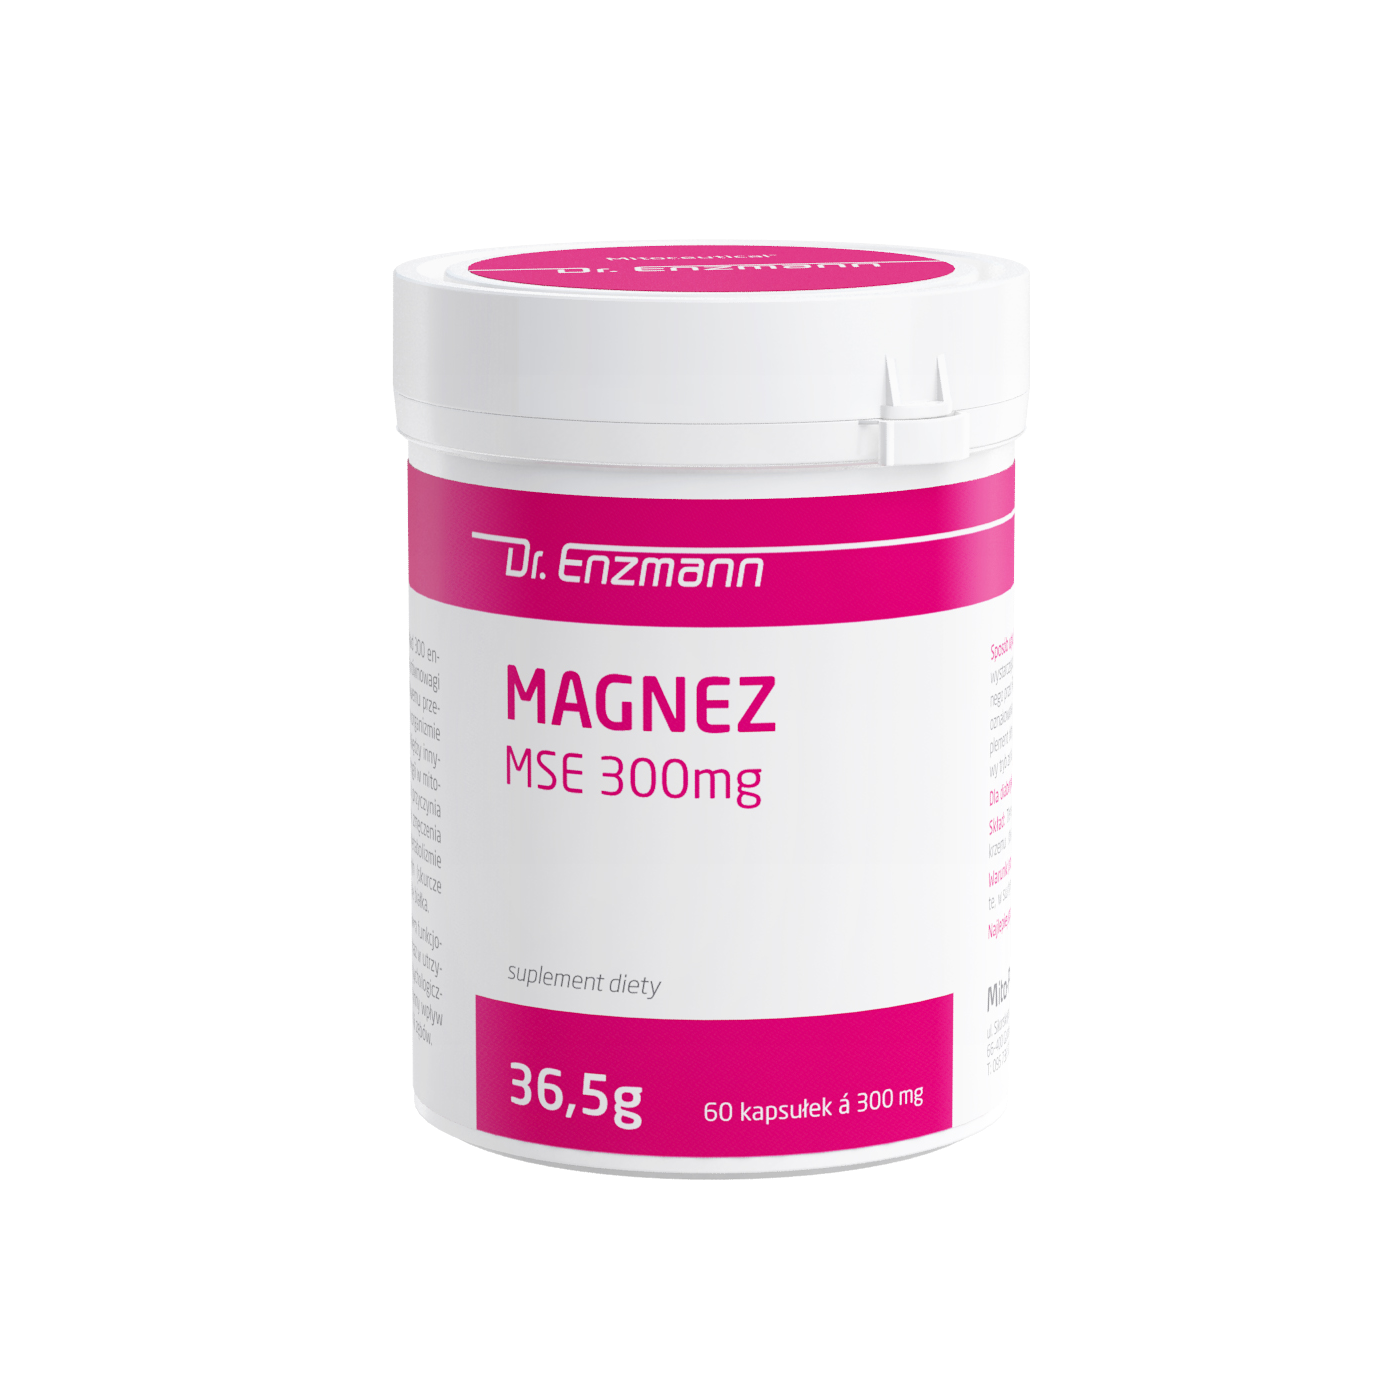 Magnez MSE 300mg